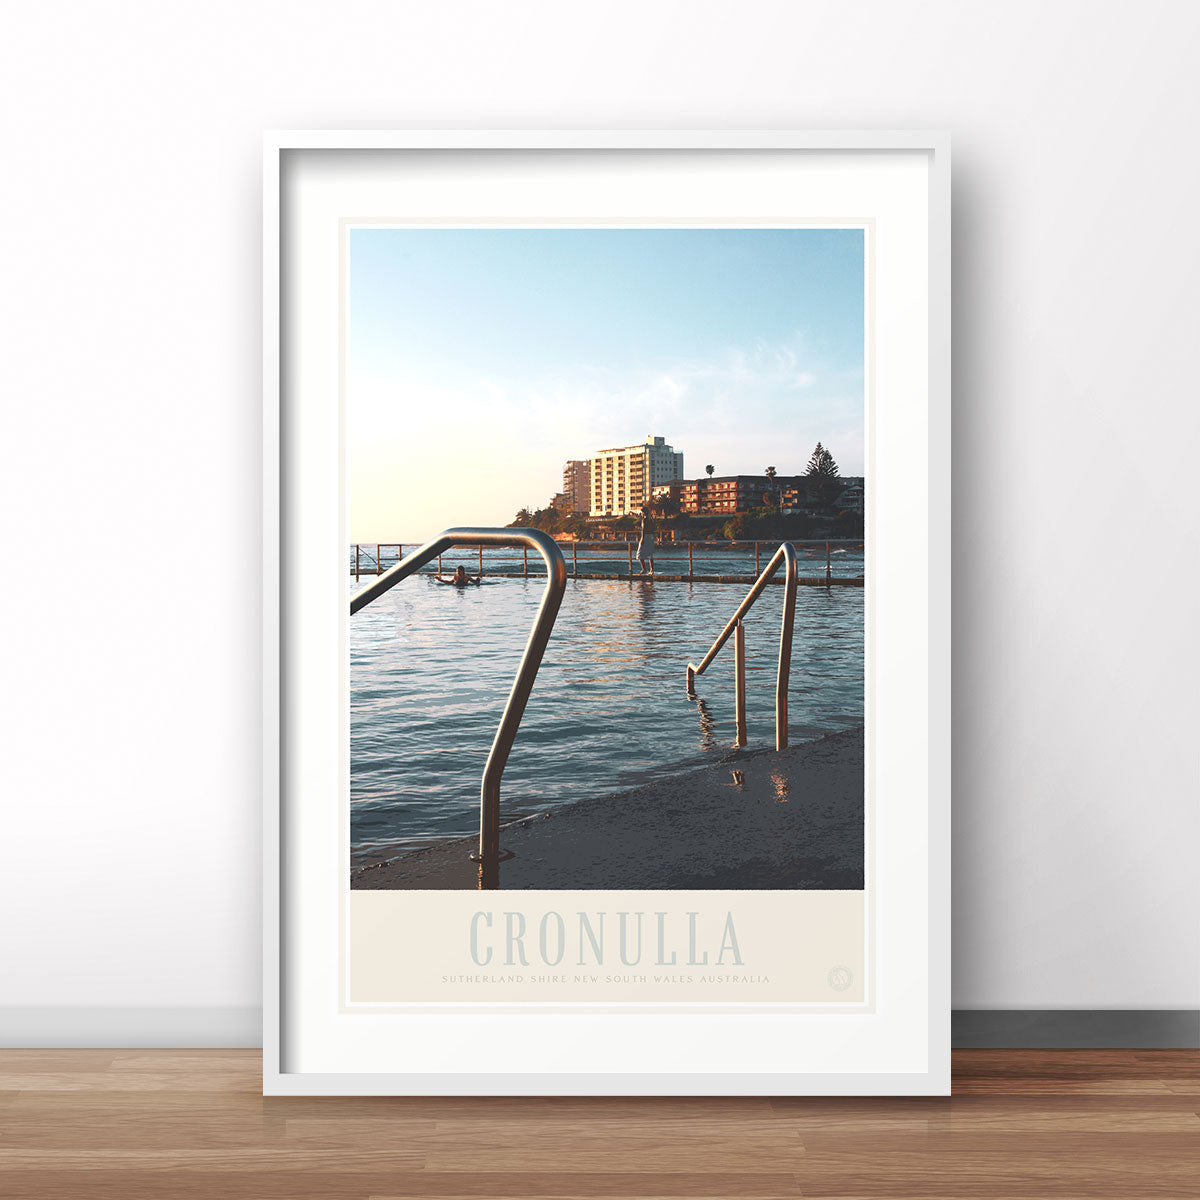 Cronulla Beach Pool vintage retro travel poster print by Places We Luv